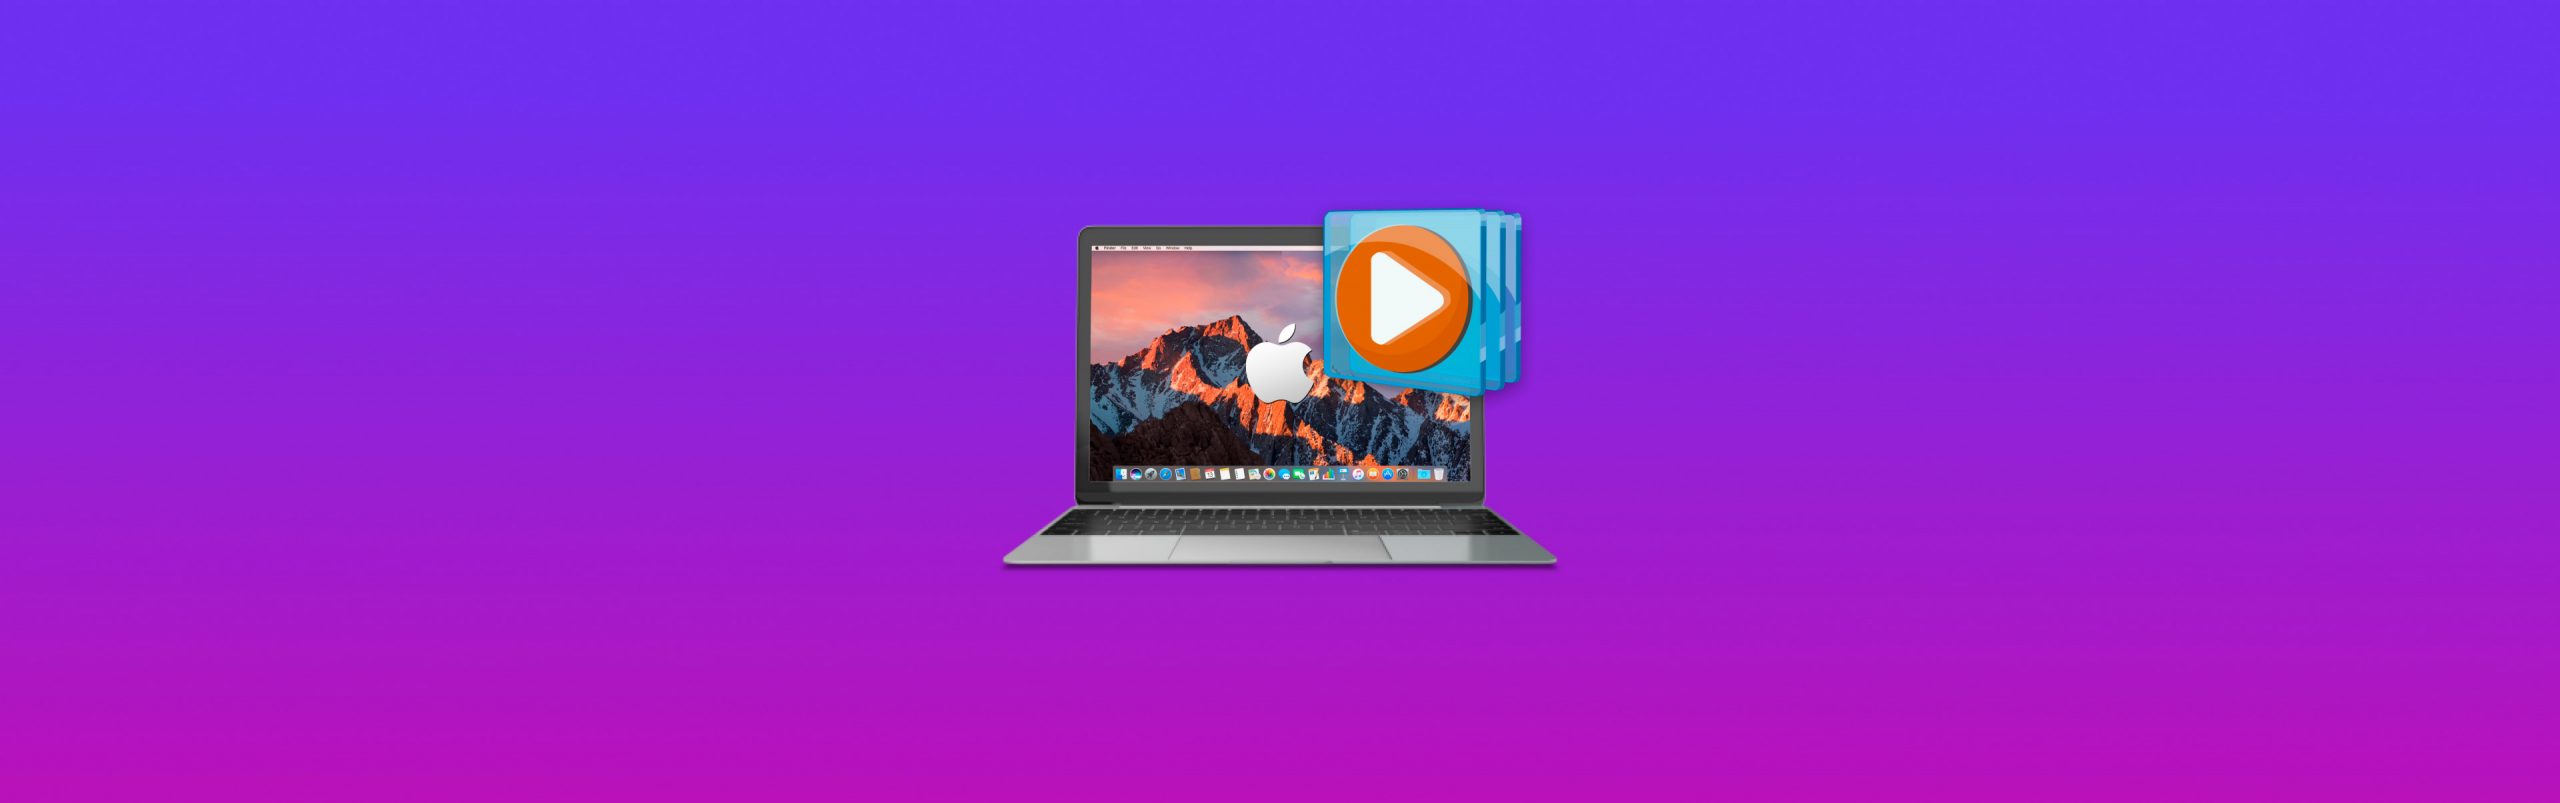 how to play a windows media file on mac